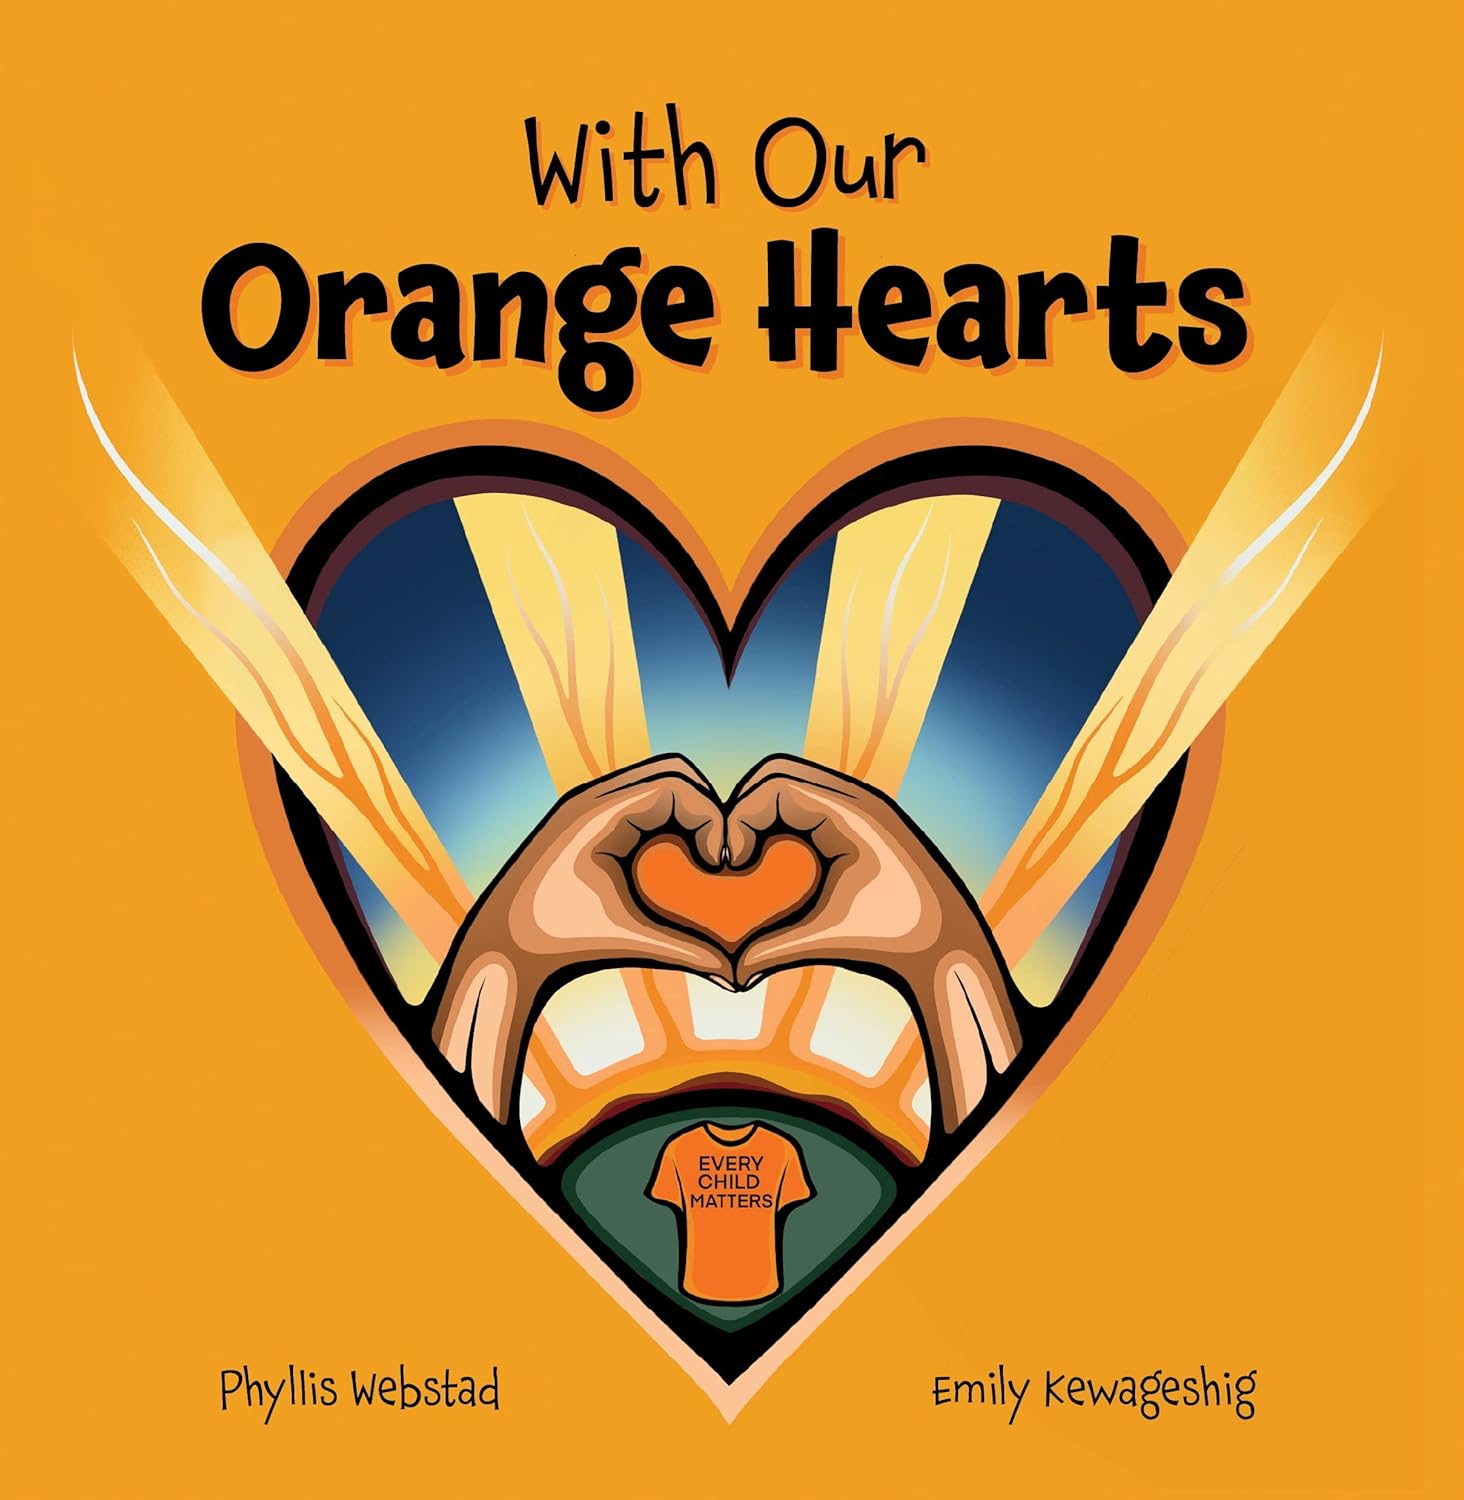 'With Our Orange Hearts' by Phyllis Webstad